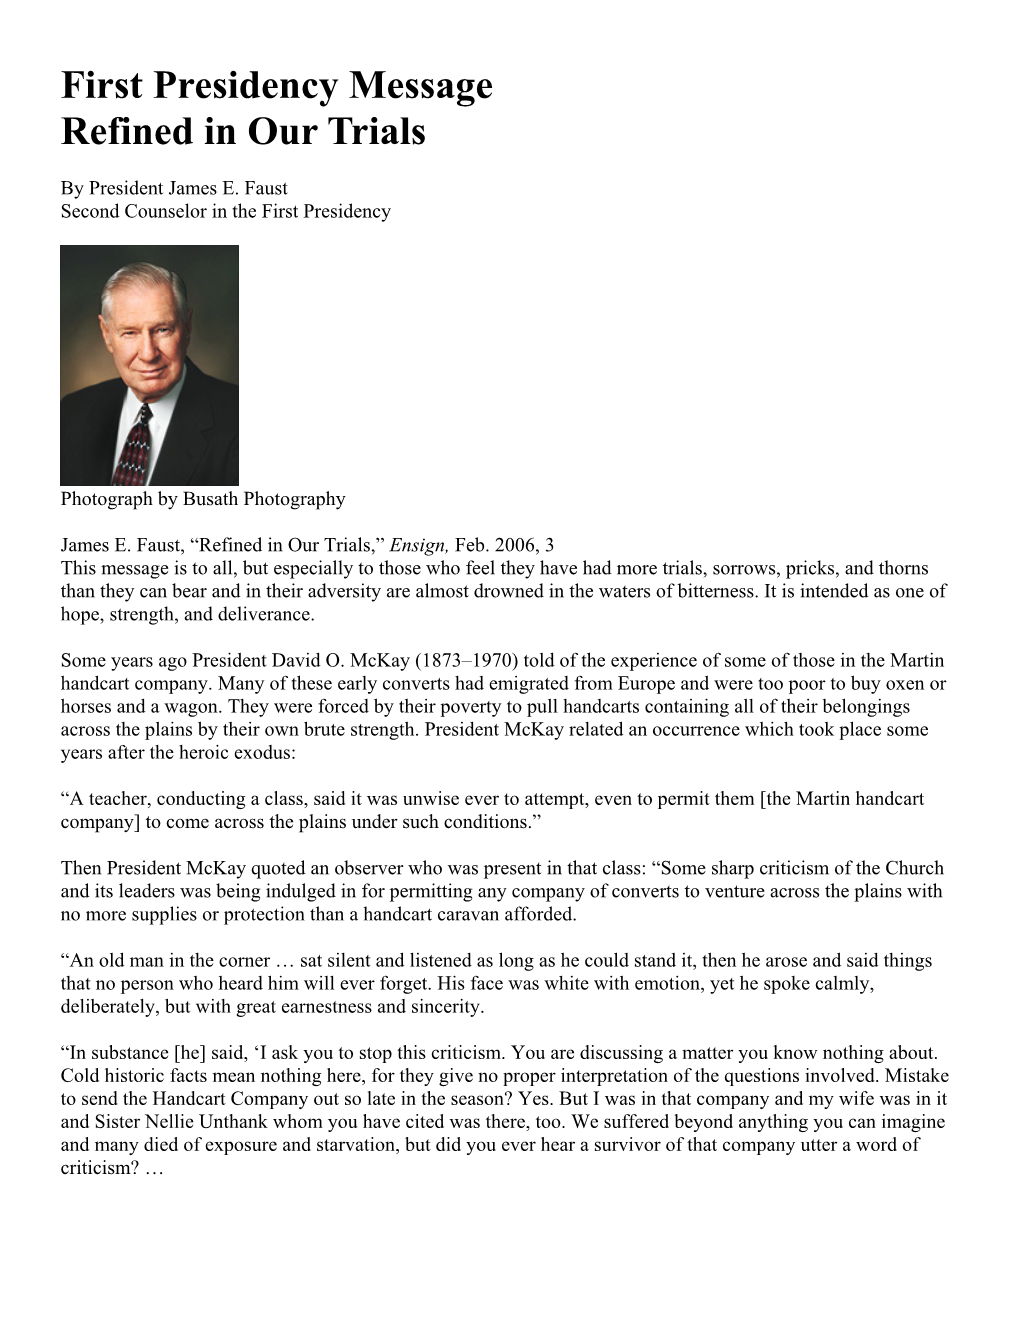 First Presidency Message Refined in Our Trials